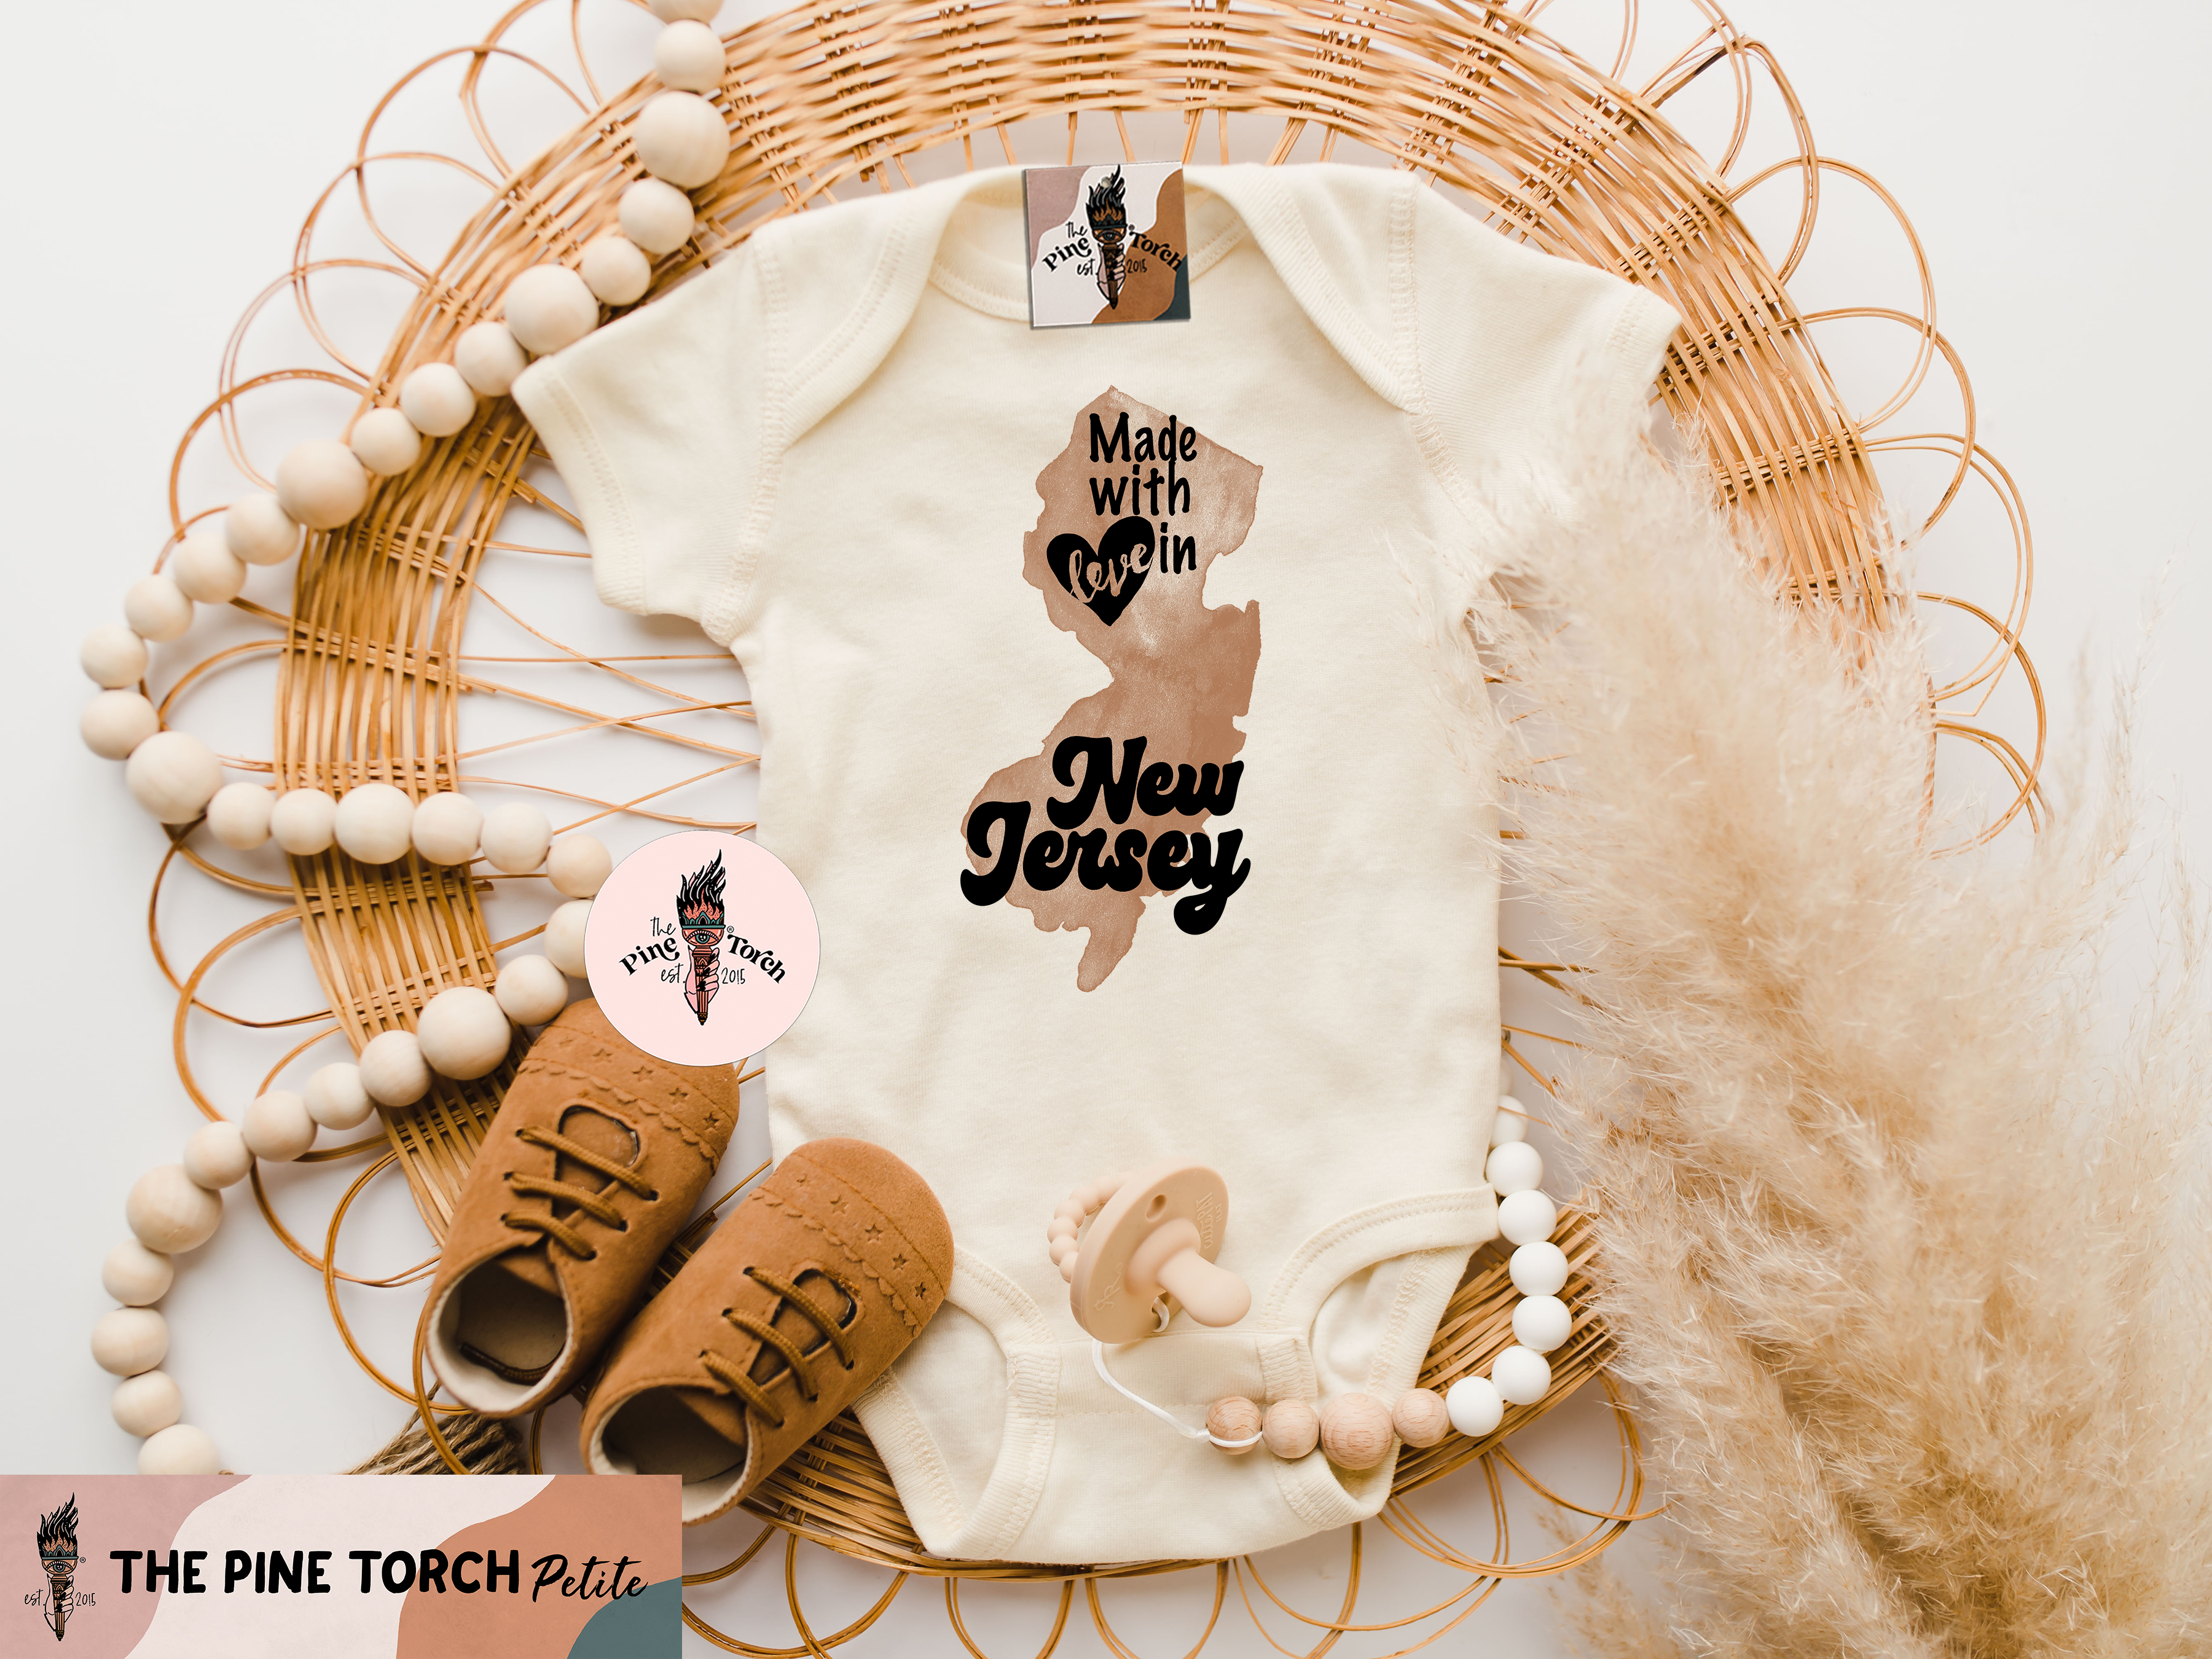 « MADE WITH LOVE IN NEW JERSEY » BODYSUIT